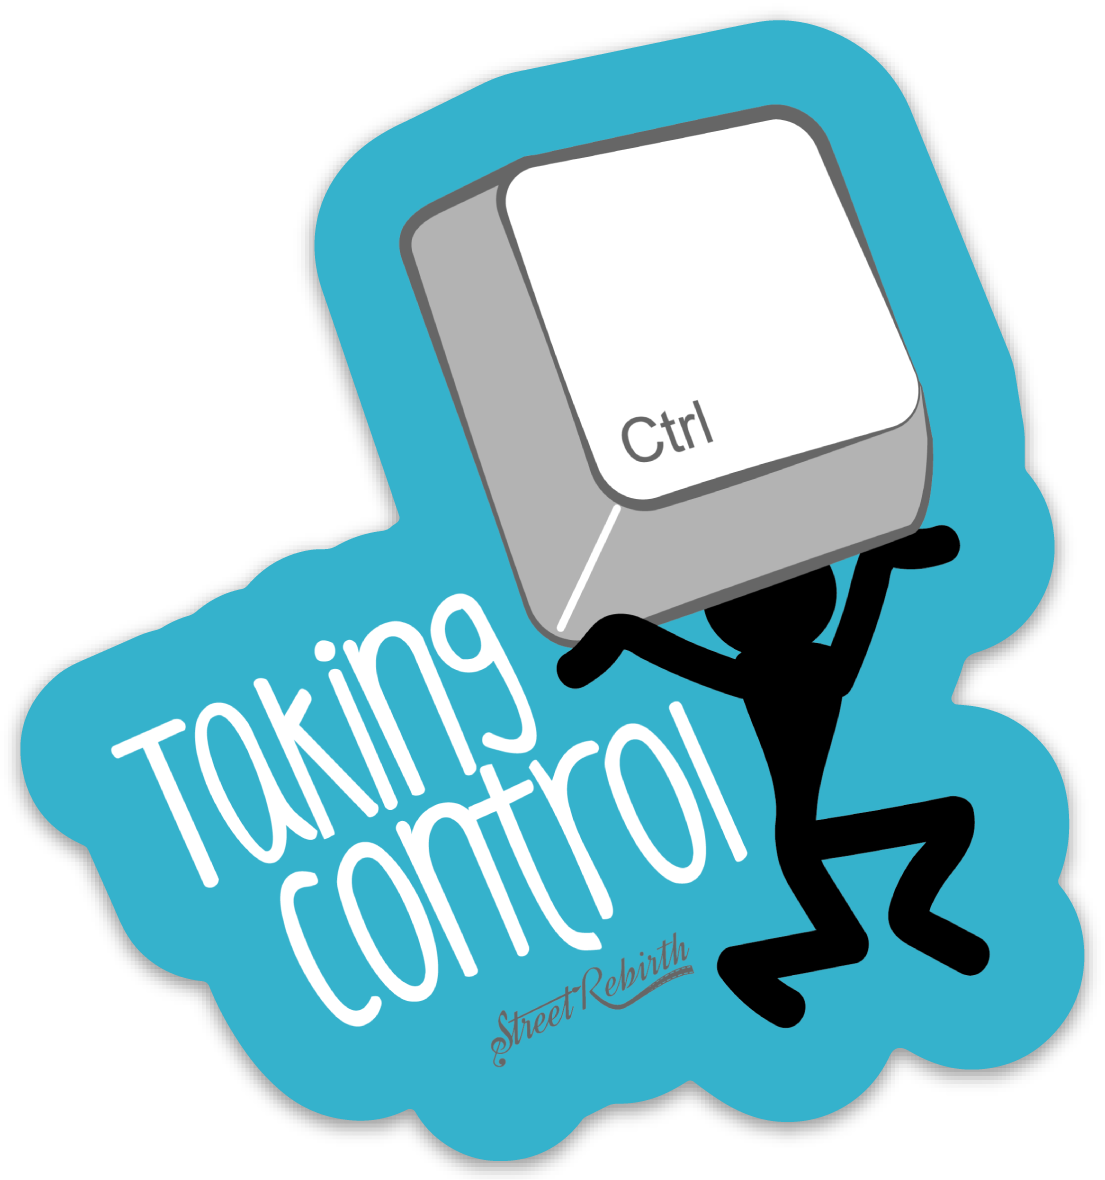 TAKING CONTROL PUN STICKER – ONE 4 INCH WATER PROOF VINYL STICKER – FOR HYDRO FLASK, SKATEBOARD, LAPTOP, PLANNER, CAR, COLLECTING, GIFTING